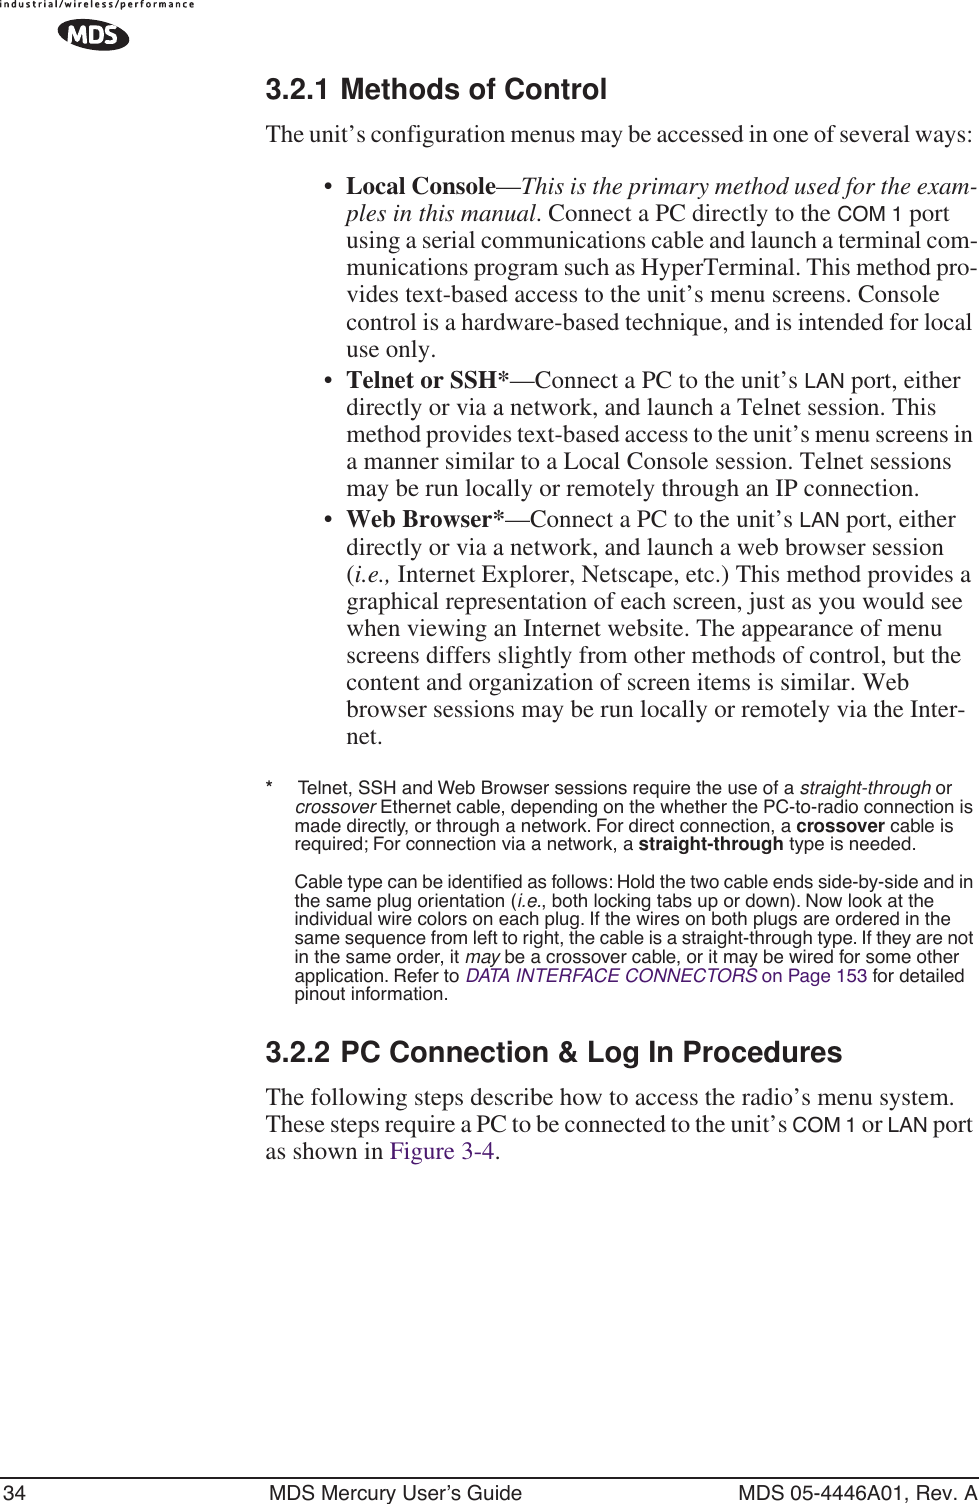 34 MDS Mercury User’s Guide MDS 05-4446A01, Rev. A3.2.1 Methods of ControlThe unit’s configuration menus may be accessed in one of several ways: •Local Console—This is the primary method used for the exam-ples in this manual. Connect a PC directly to the COM 1 port using a serial communications cable and launch a terminal com-munications program such as HyperTerminal. This method pro-vides text-based access to the unit’s menu screens. Console control is a hardware-based technique, and is intended for local use only.•Telnet or SSH*—Connect a PC to the unit’s LAN port, either directly or via a network, and launch a Telnet session. This method provides text-based access to the unit’s menu screens in a manner similar to a Local Console session. Telnet sessions may be run locally or remotely through an IP connection. •Web Browser*—Connect a PC to the unit’s LAN port, either directly or via a network, and launch a web browser session (i.e., Internet Explorer, Netscape, etc.) This method provides a graphical representation of each screen, just as you would see when viewing an Internet website. The appearance of menu screens differs slightly from other methods of control, but the content and organization of screen items is similar. Web browser sessions may be run locally or remotely via the Inter-net.*     Telnet, SSH and Web Browser sessions require the use of a straight-through or crossover Ethernet cable, depending on the whether the PC-to-radio connection is made directly, or through a network. For direct connection, a crossover cable is required; For connection via a network, a straight-through type is needed.Cable type can be identiﬁed as follows: Hold the two cable ends side-by-side and in the same plug orientation (i.e., both locking tabs up or down). Now look at the individual wire colors on each plug. If the wires on both plugs are ordered in the same sequence from left to right, the cable is a straight-through type. If they are not in the same order, it may be a crossover cable, or it may be wired for some other application. Refer to DATA INTERFACE CONNECTORS on Page 153 for detailed pinout information.3.2.2 PC Connection &amp; Log In ProceduresThe following steps describe how to access the radio’s menu system. These steps require a PC to be connected to the unit’s COM 1 or LAN port as shown in Figure 3-4. 